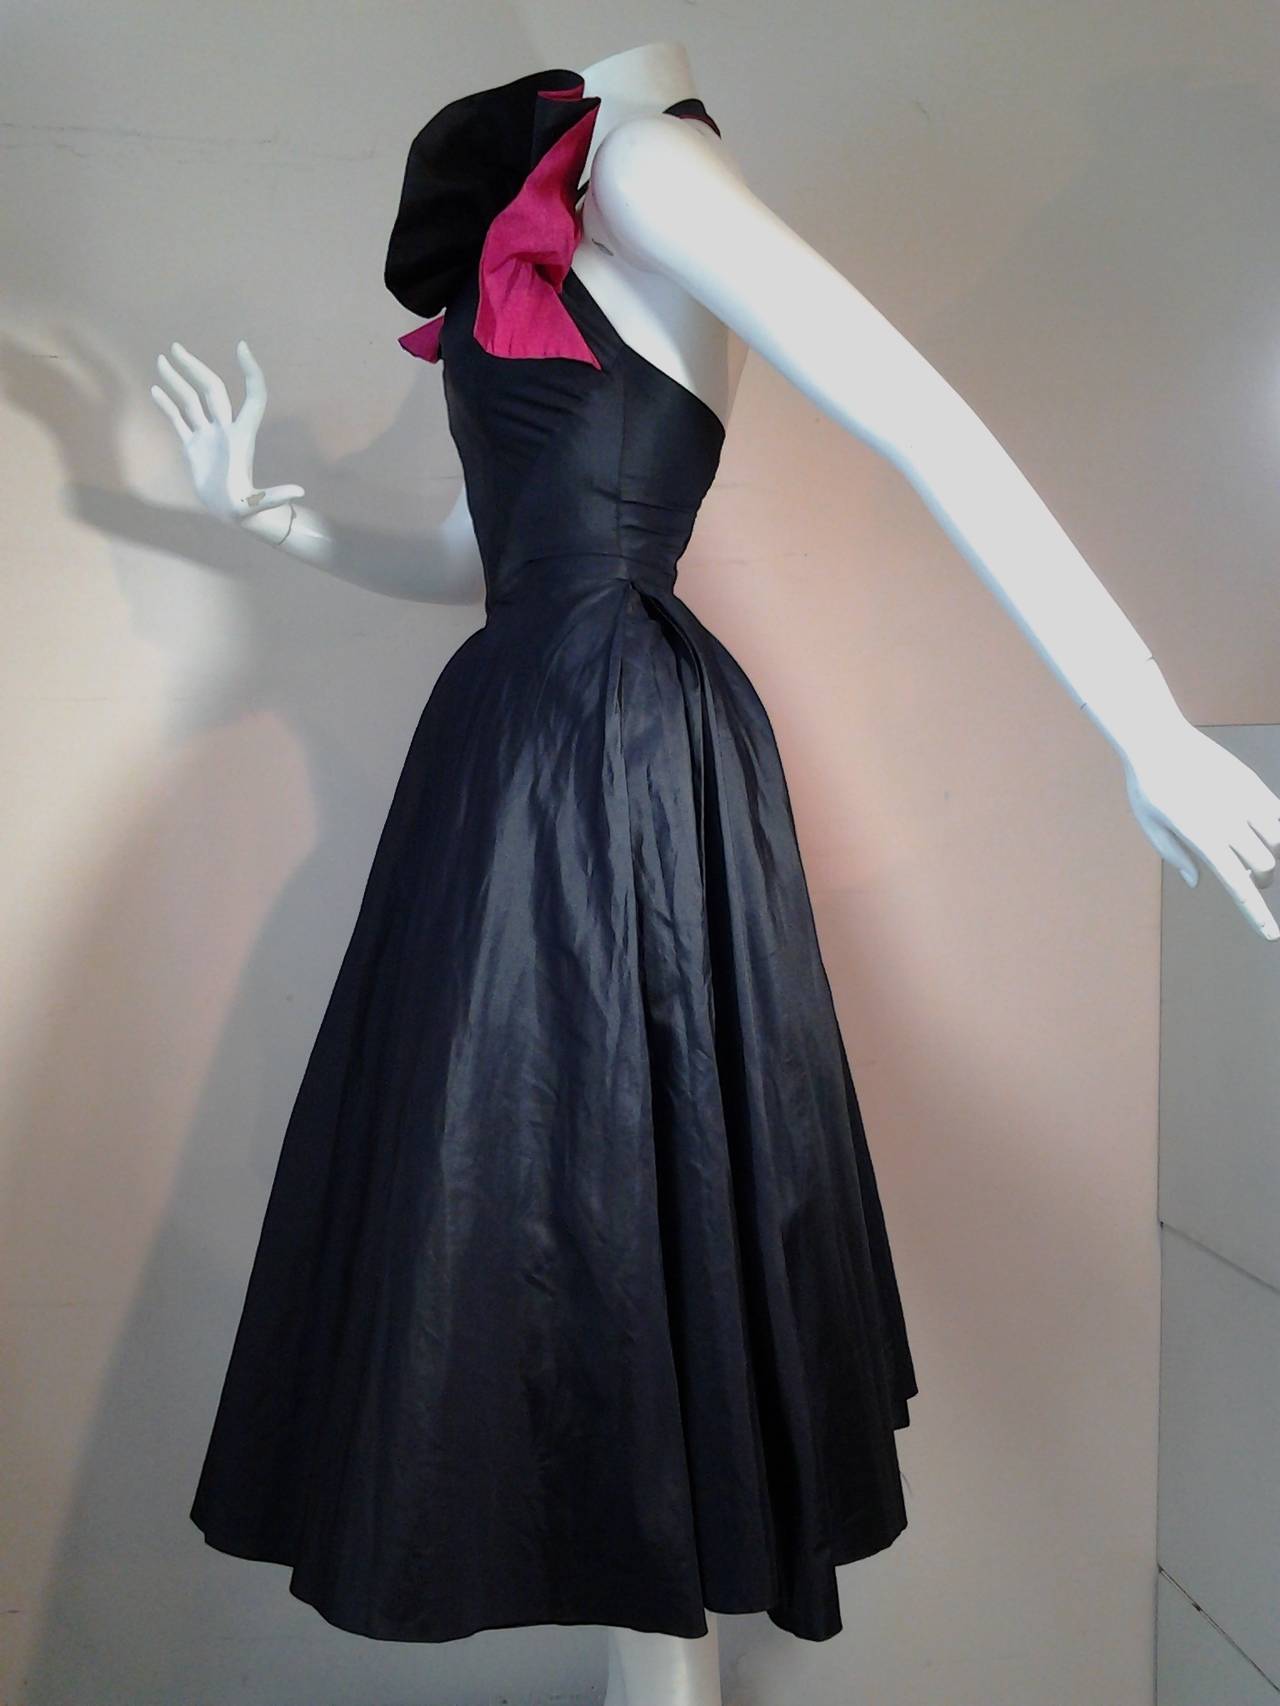 A gorgeous early 1950s midnight blue silk taffeta halter dancing dress:  full skirt with heavy inverted pleats at center front. Corset-style fit seaming in bodice. Fuchsia silk faille ruffled décolletage. Wide horsehair braid inside dress hem. 